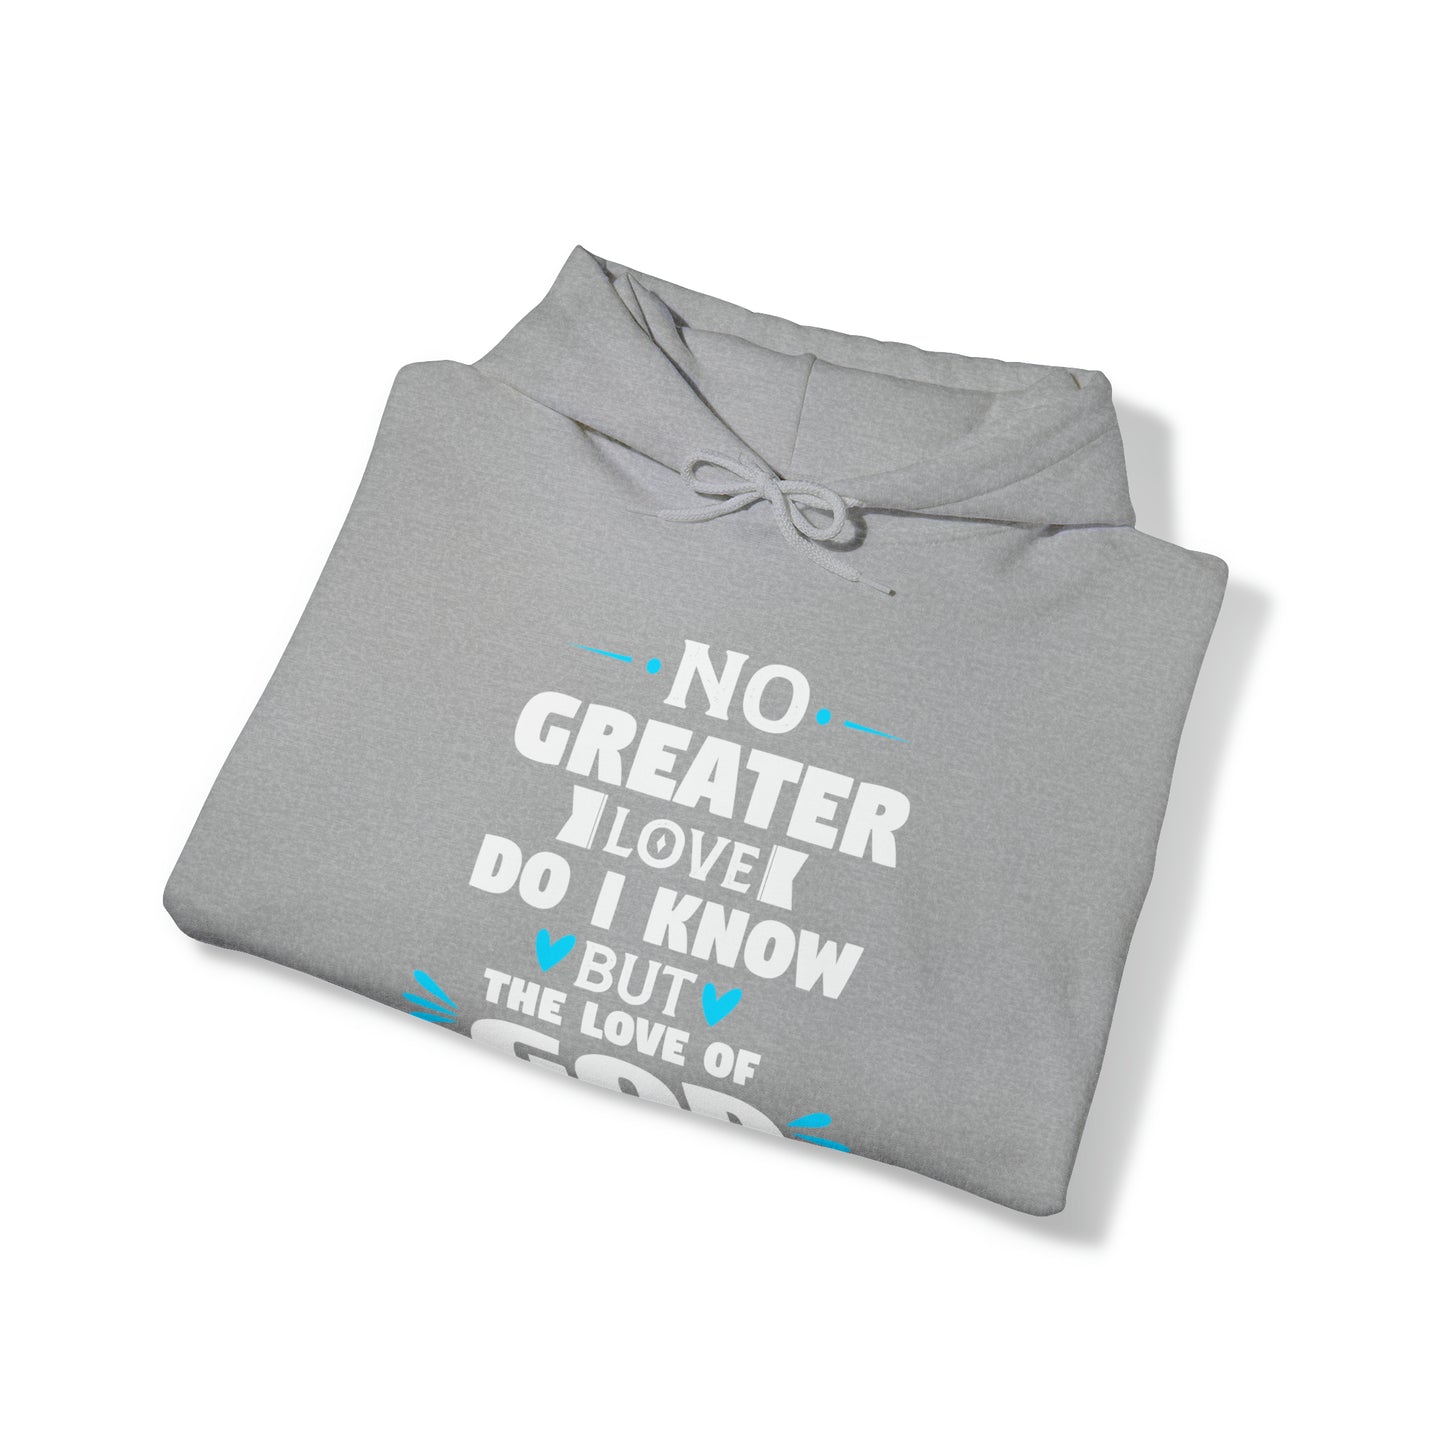 No Greater Love Do I Know But The Love Of God  Unisex Hooded Sweatshirt